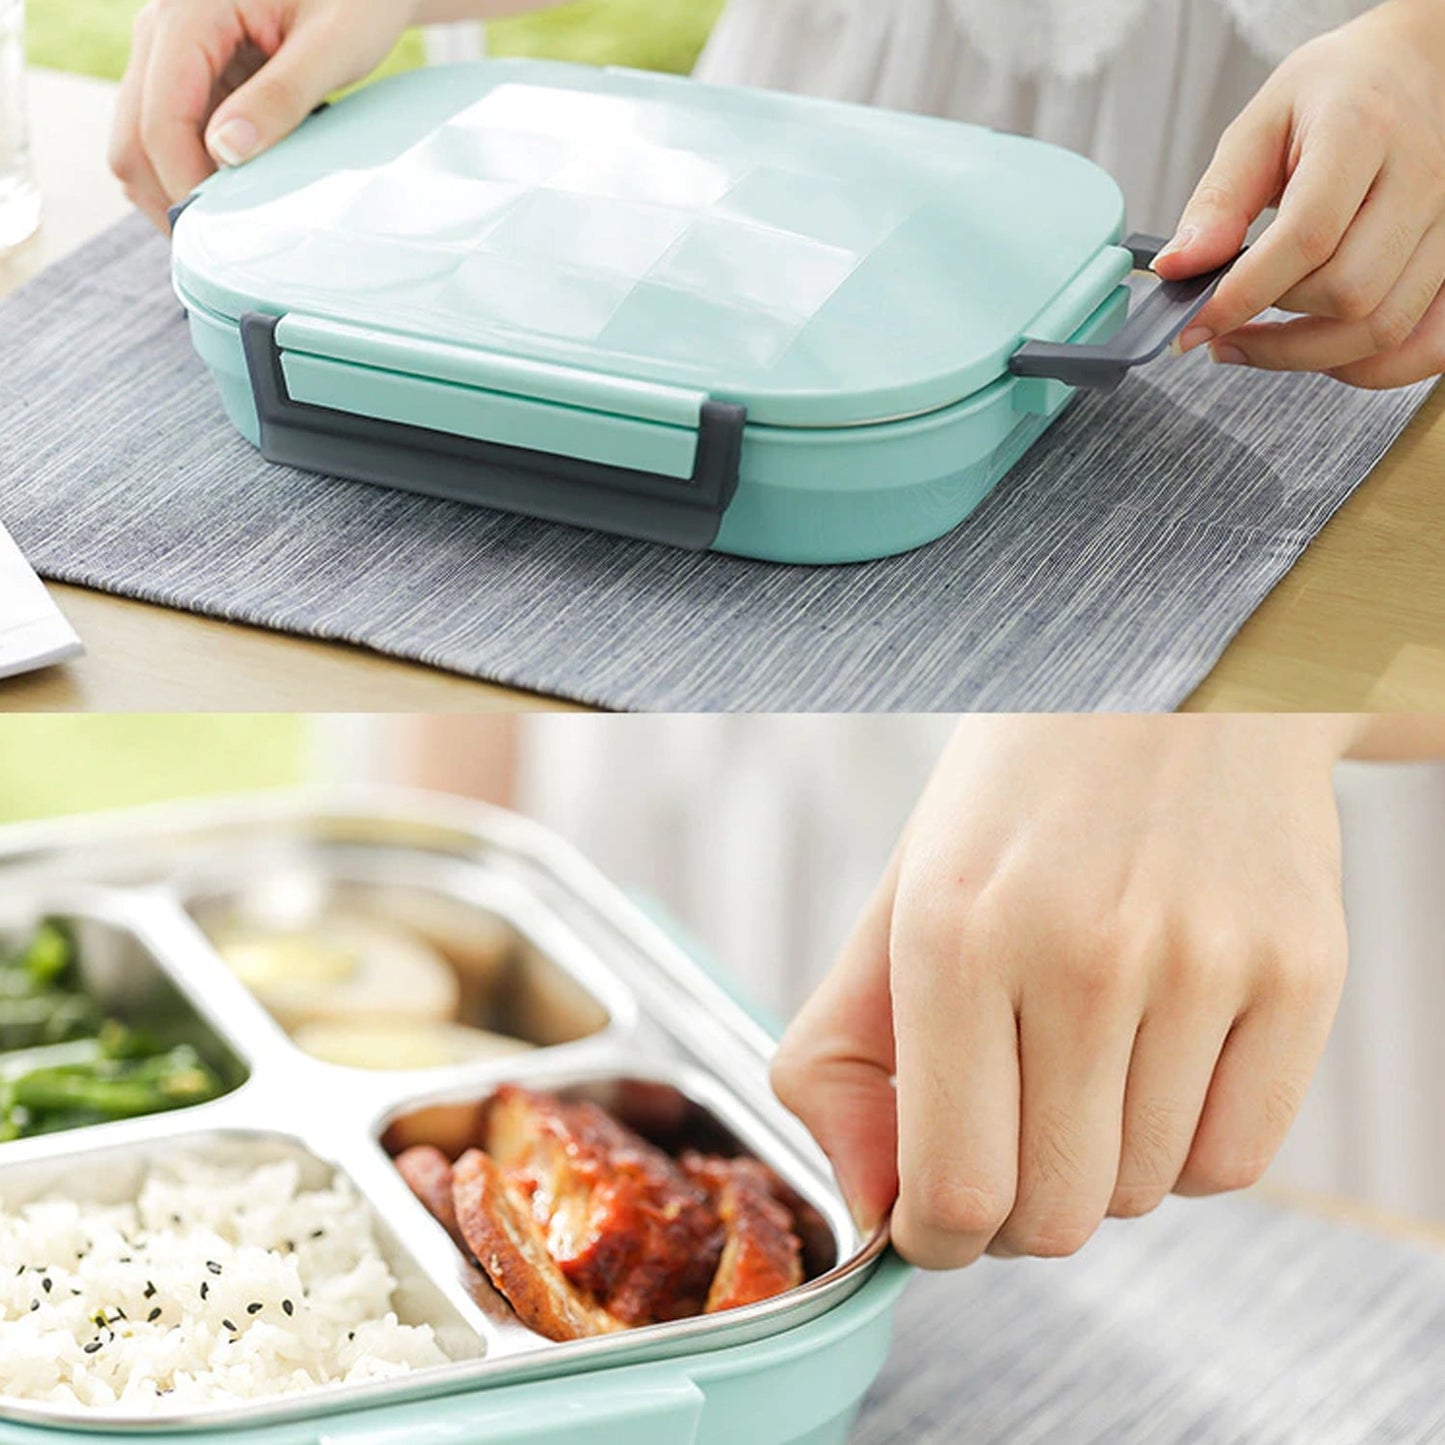 2978 Lunch Box for Kids and adults, Stainless Steel Lunch Box with 4 Compartments. DeoDap